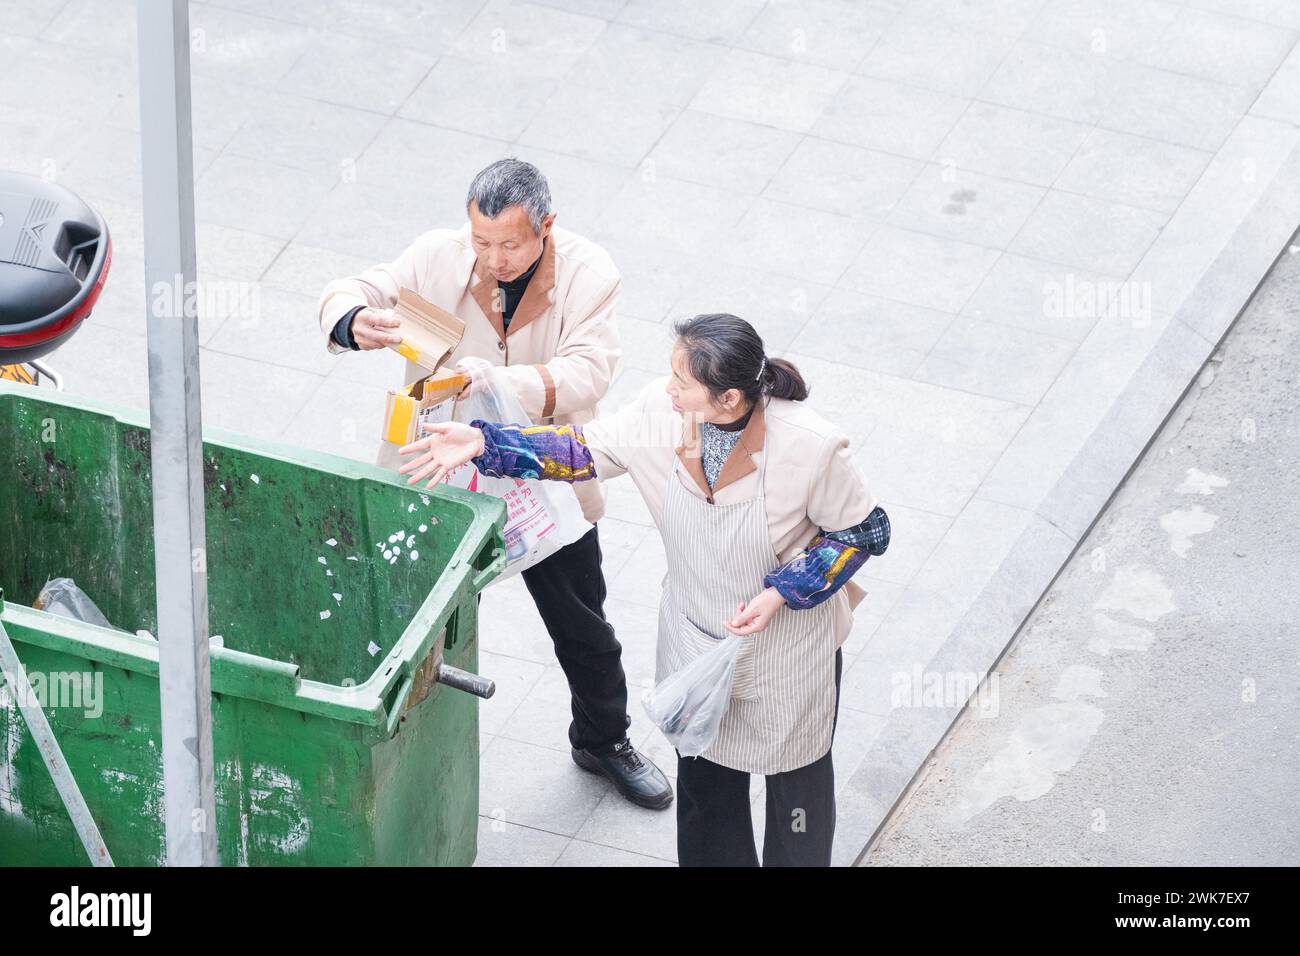 Old man and woman taking out trash Stock Photo